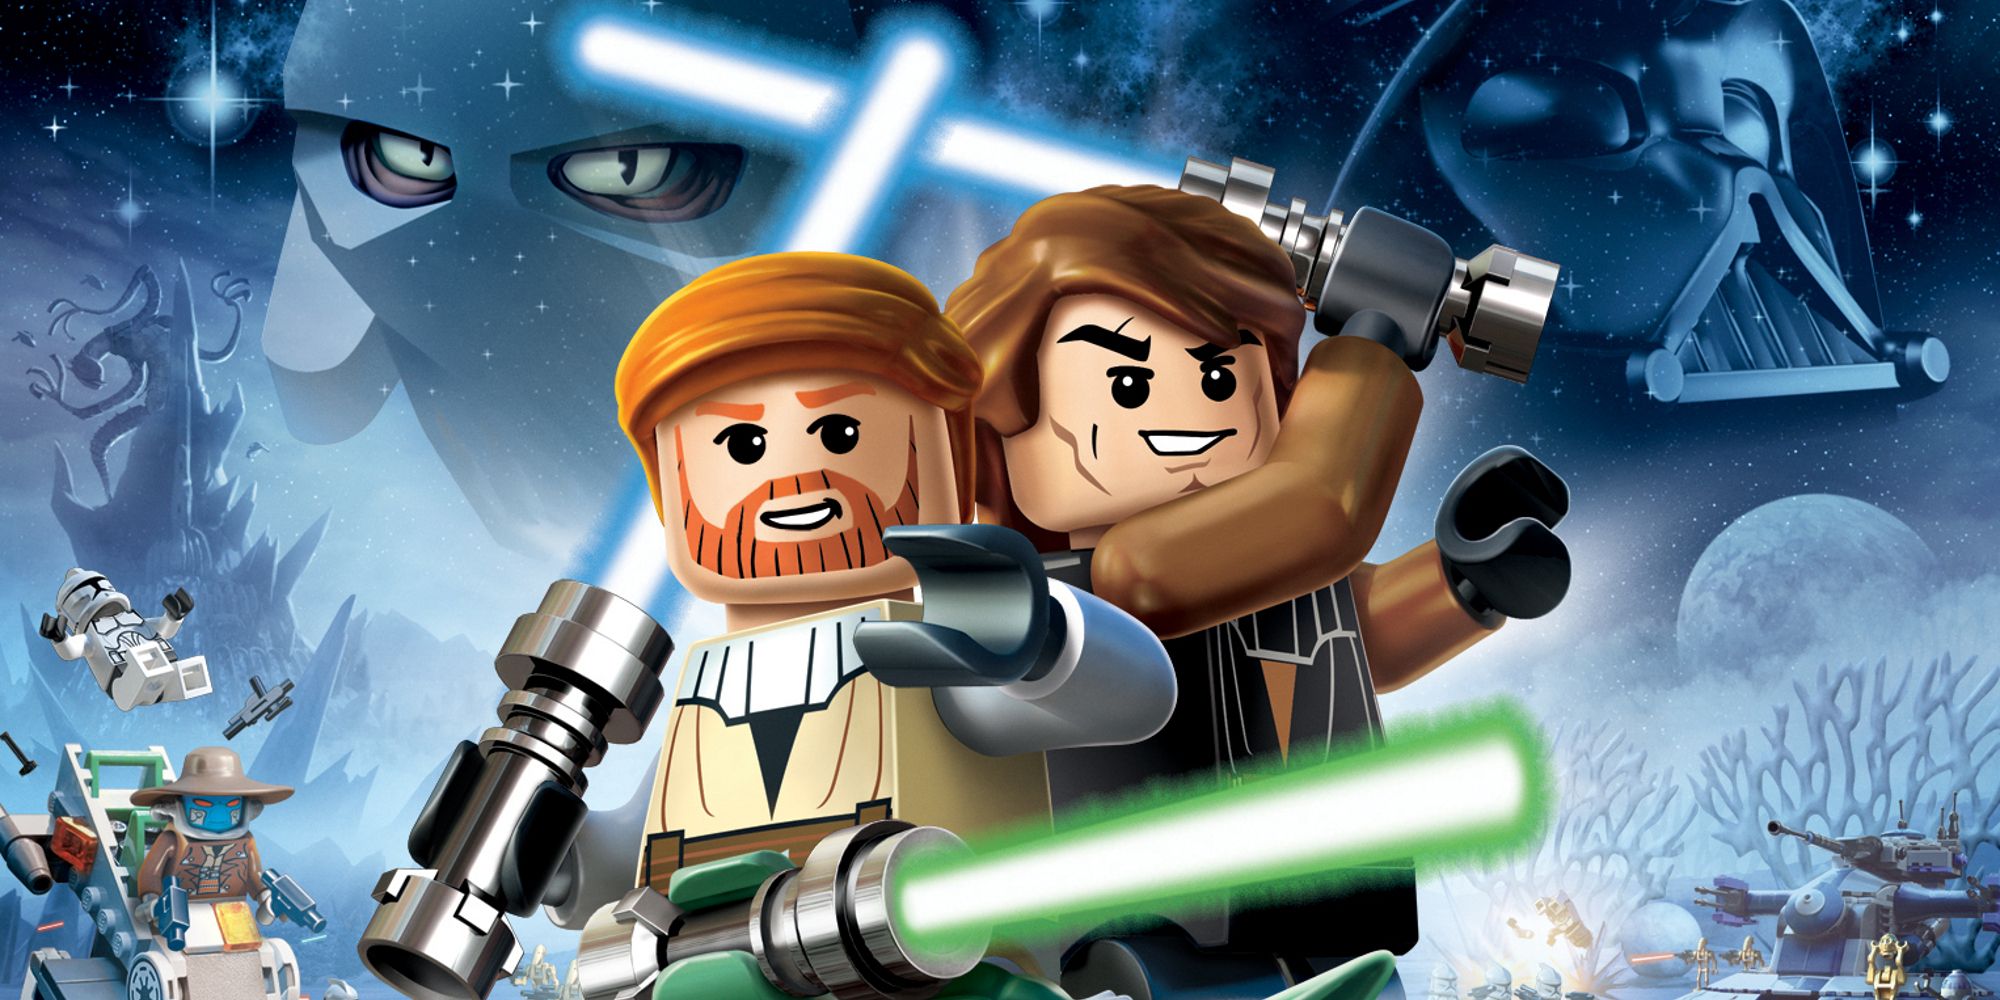 Cover artwork for LEGO Star Wars III The Clone Wars